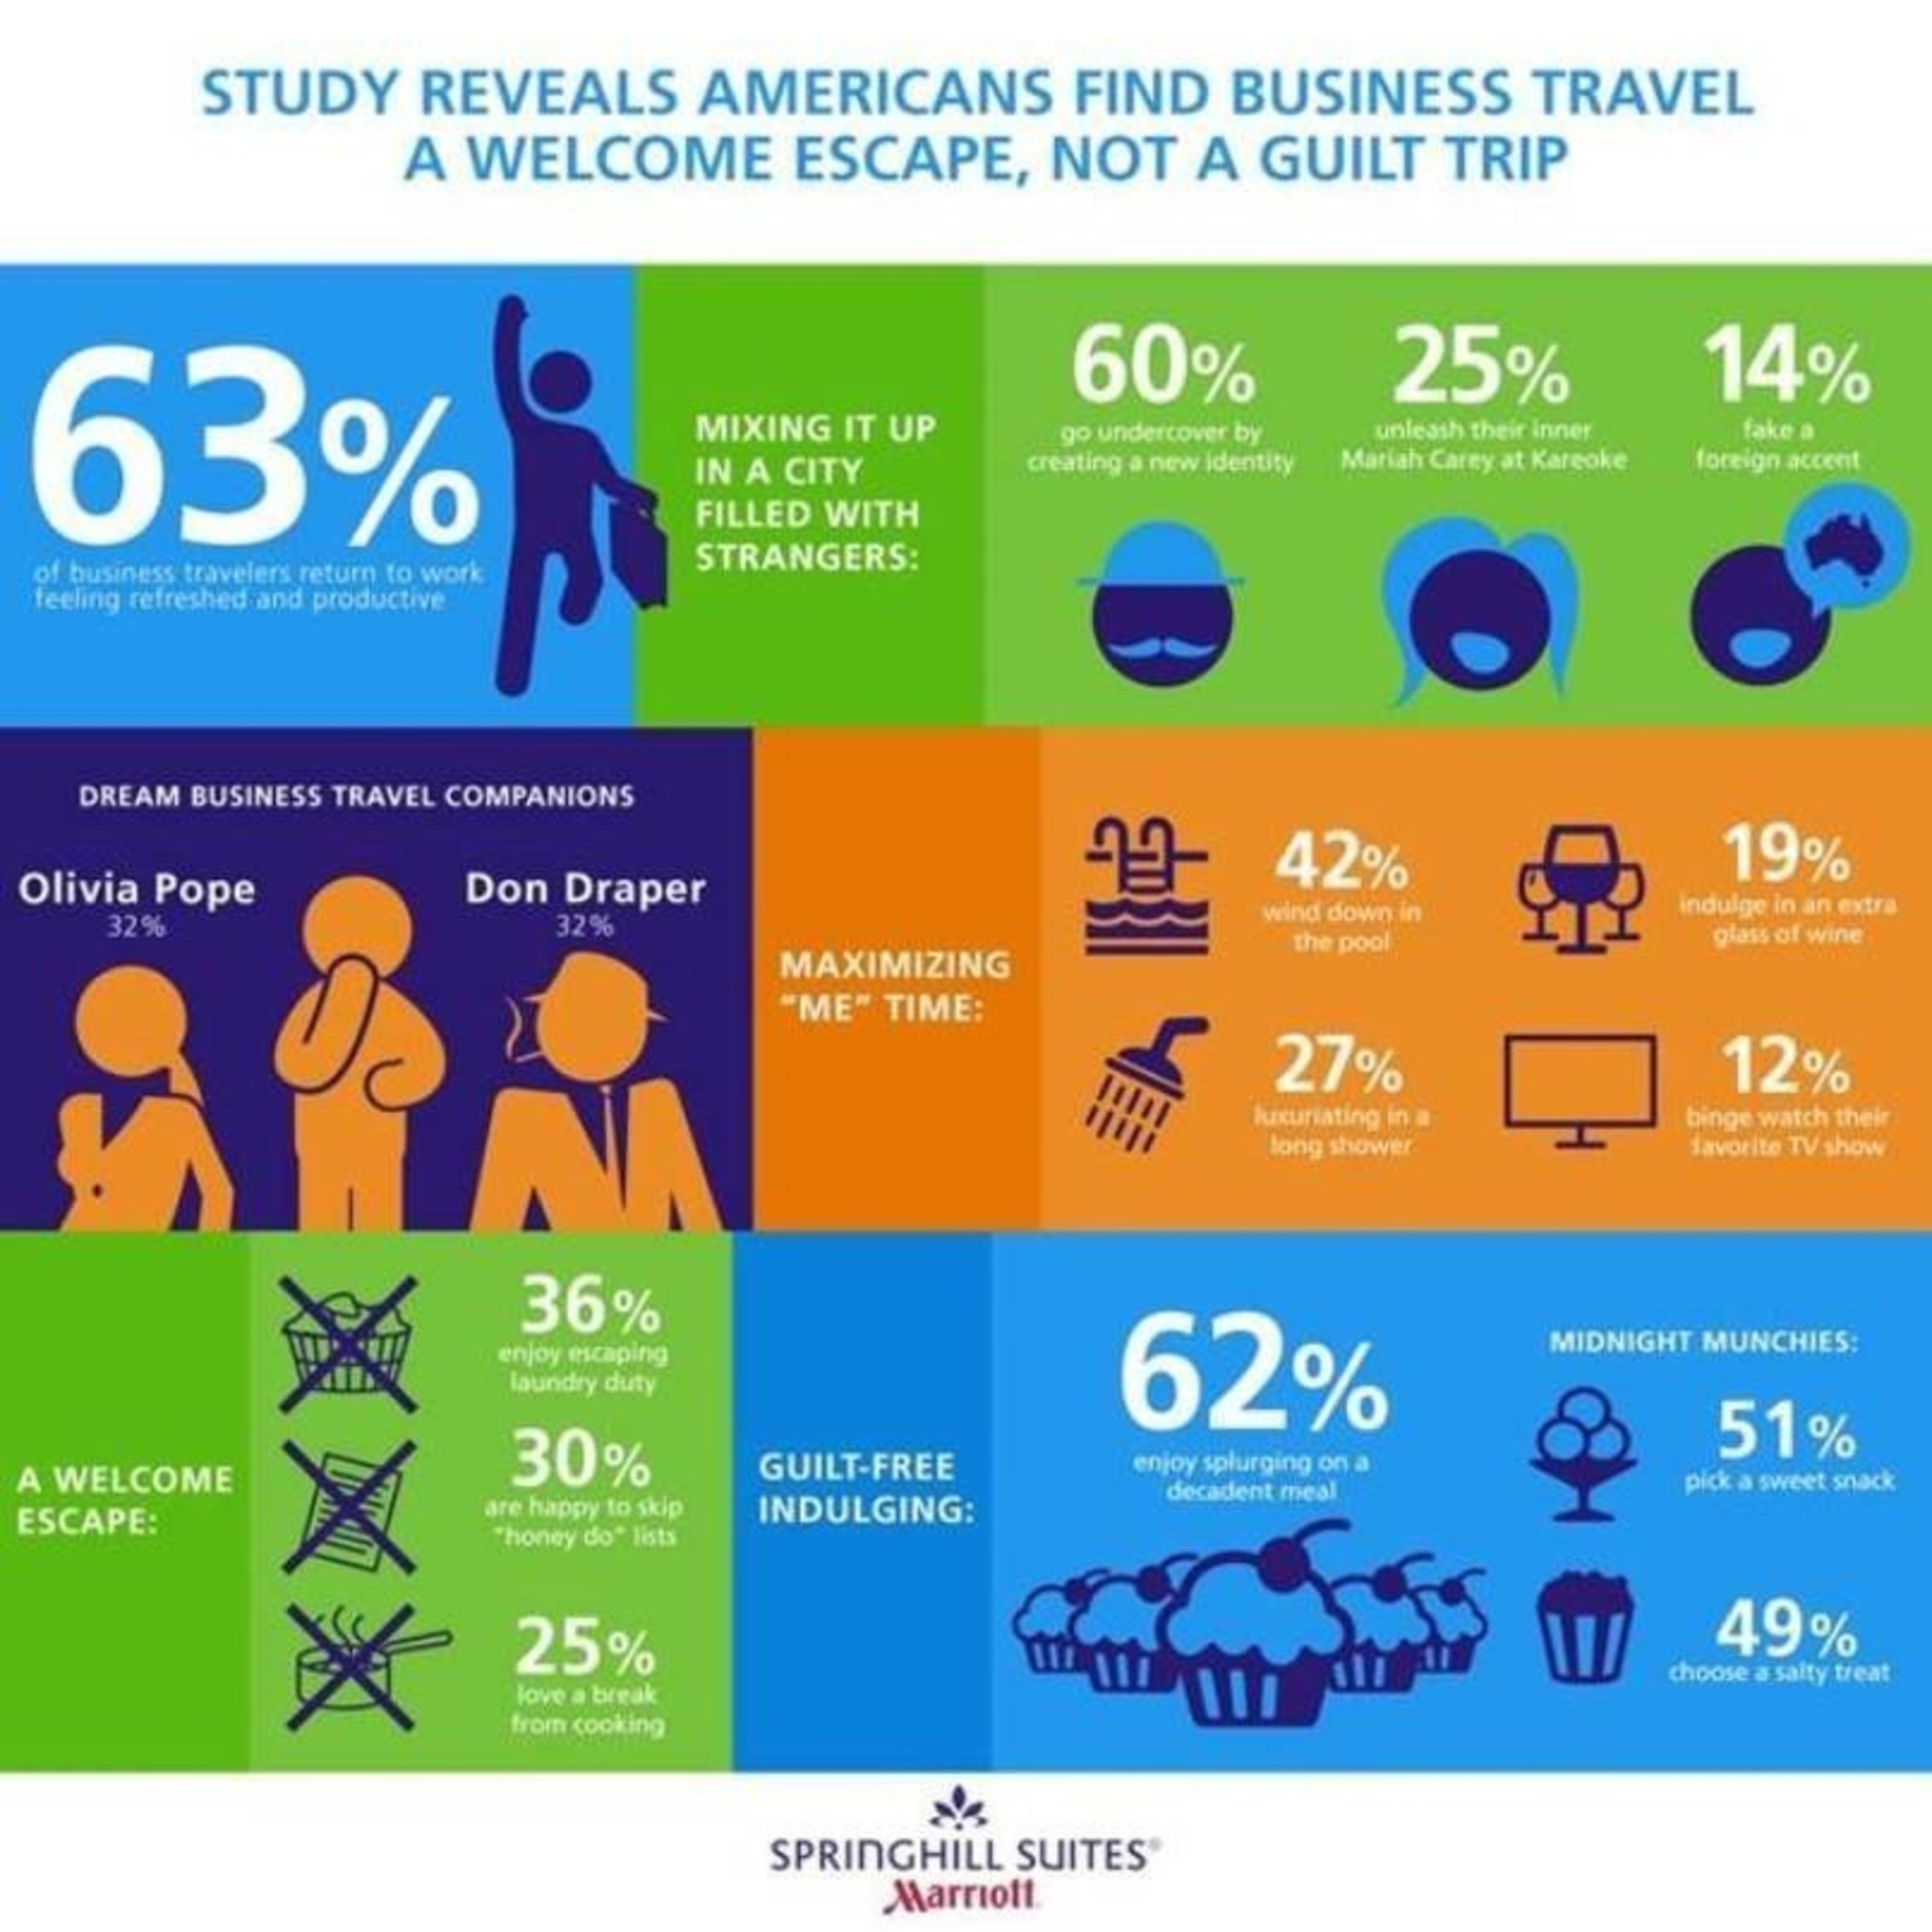 A new survey conducted by SpringHill Suites by Marriott reveals business travelers are making the most of their trips by maximizing "me time," indulging in activities they may shy away from at home